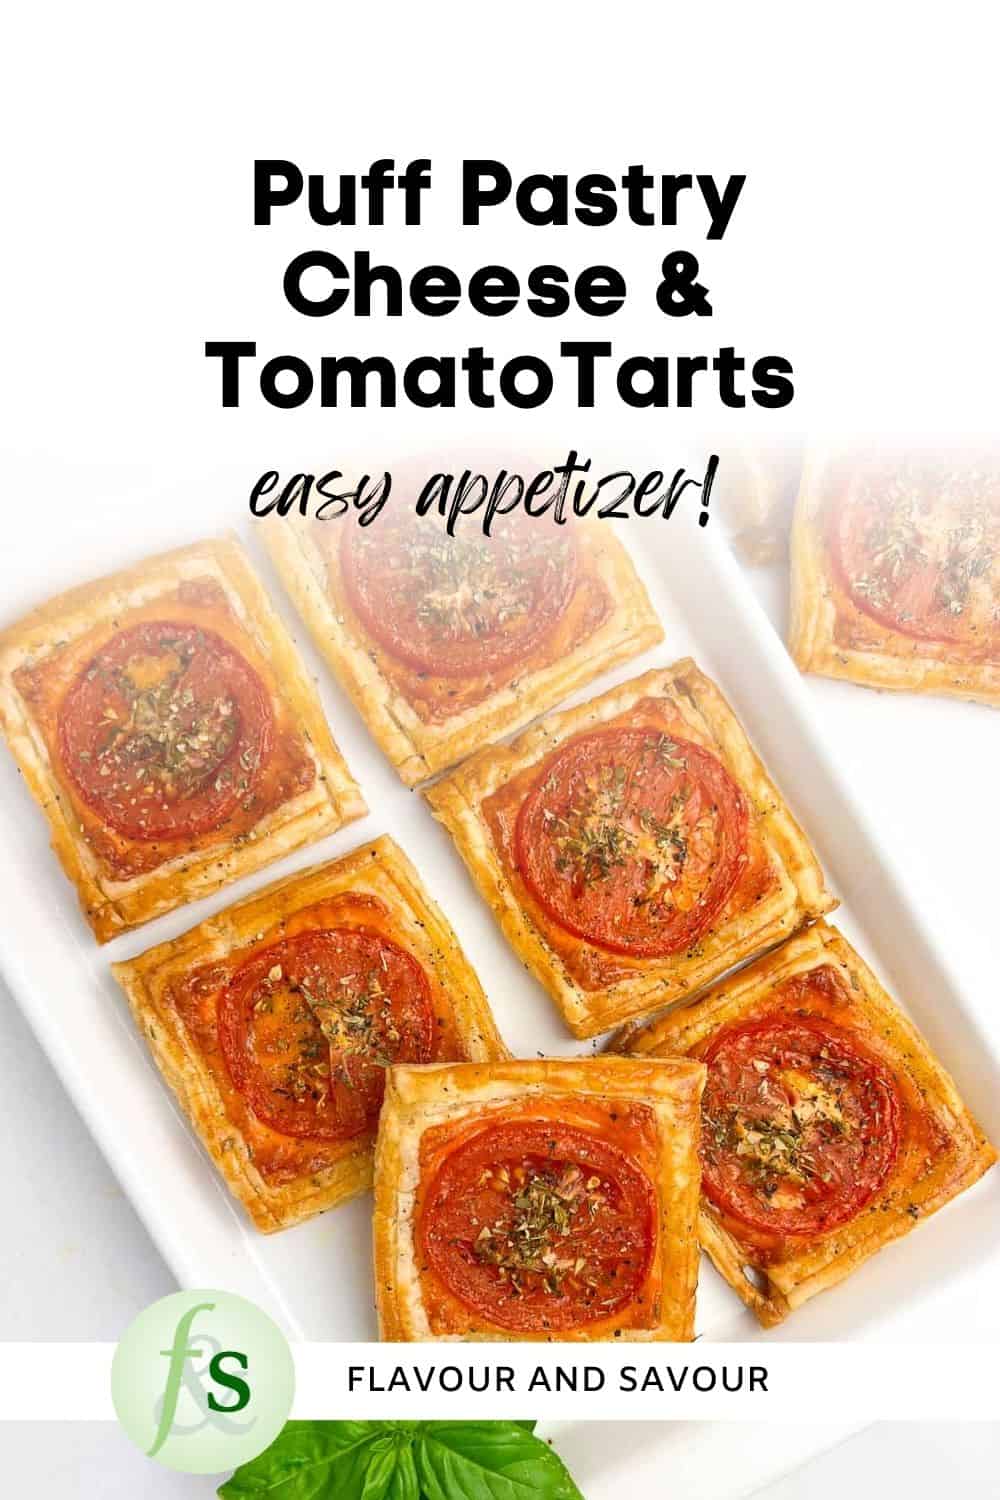 Image with text overlay for puff pastry cheese and tomato tarts.